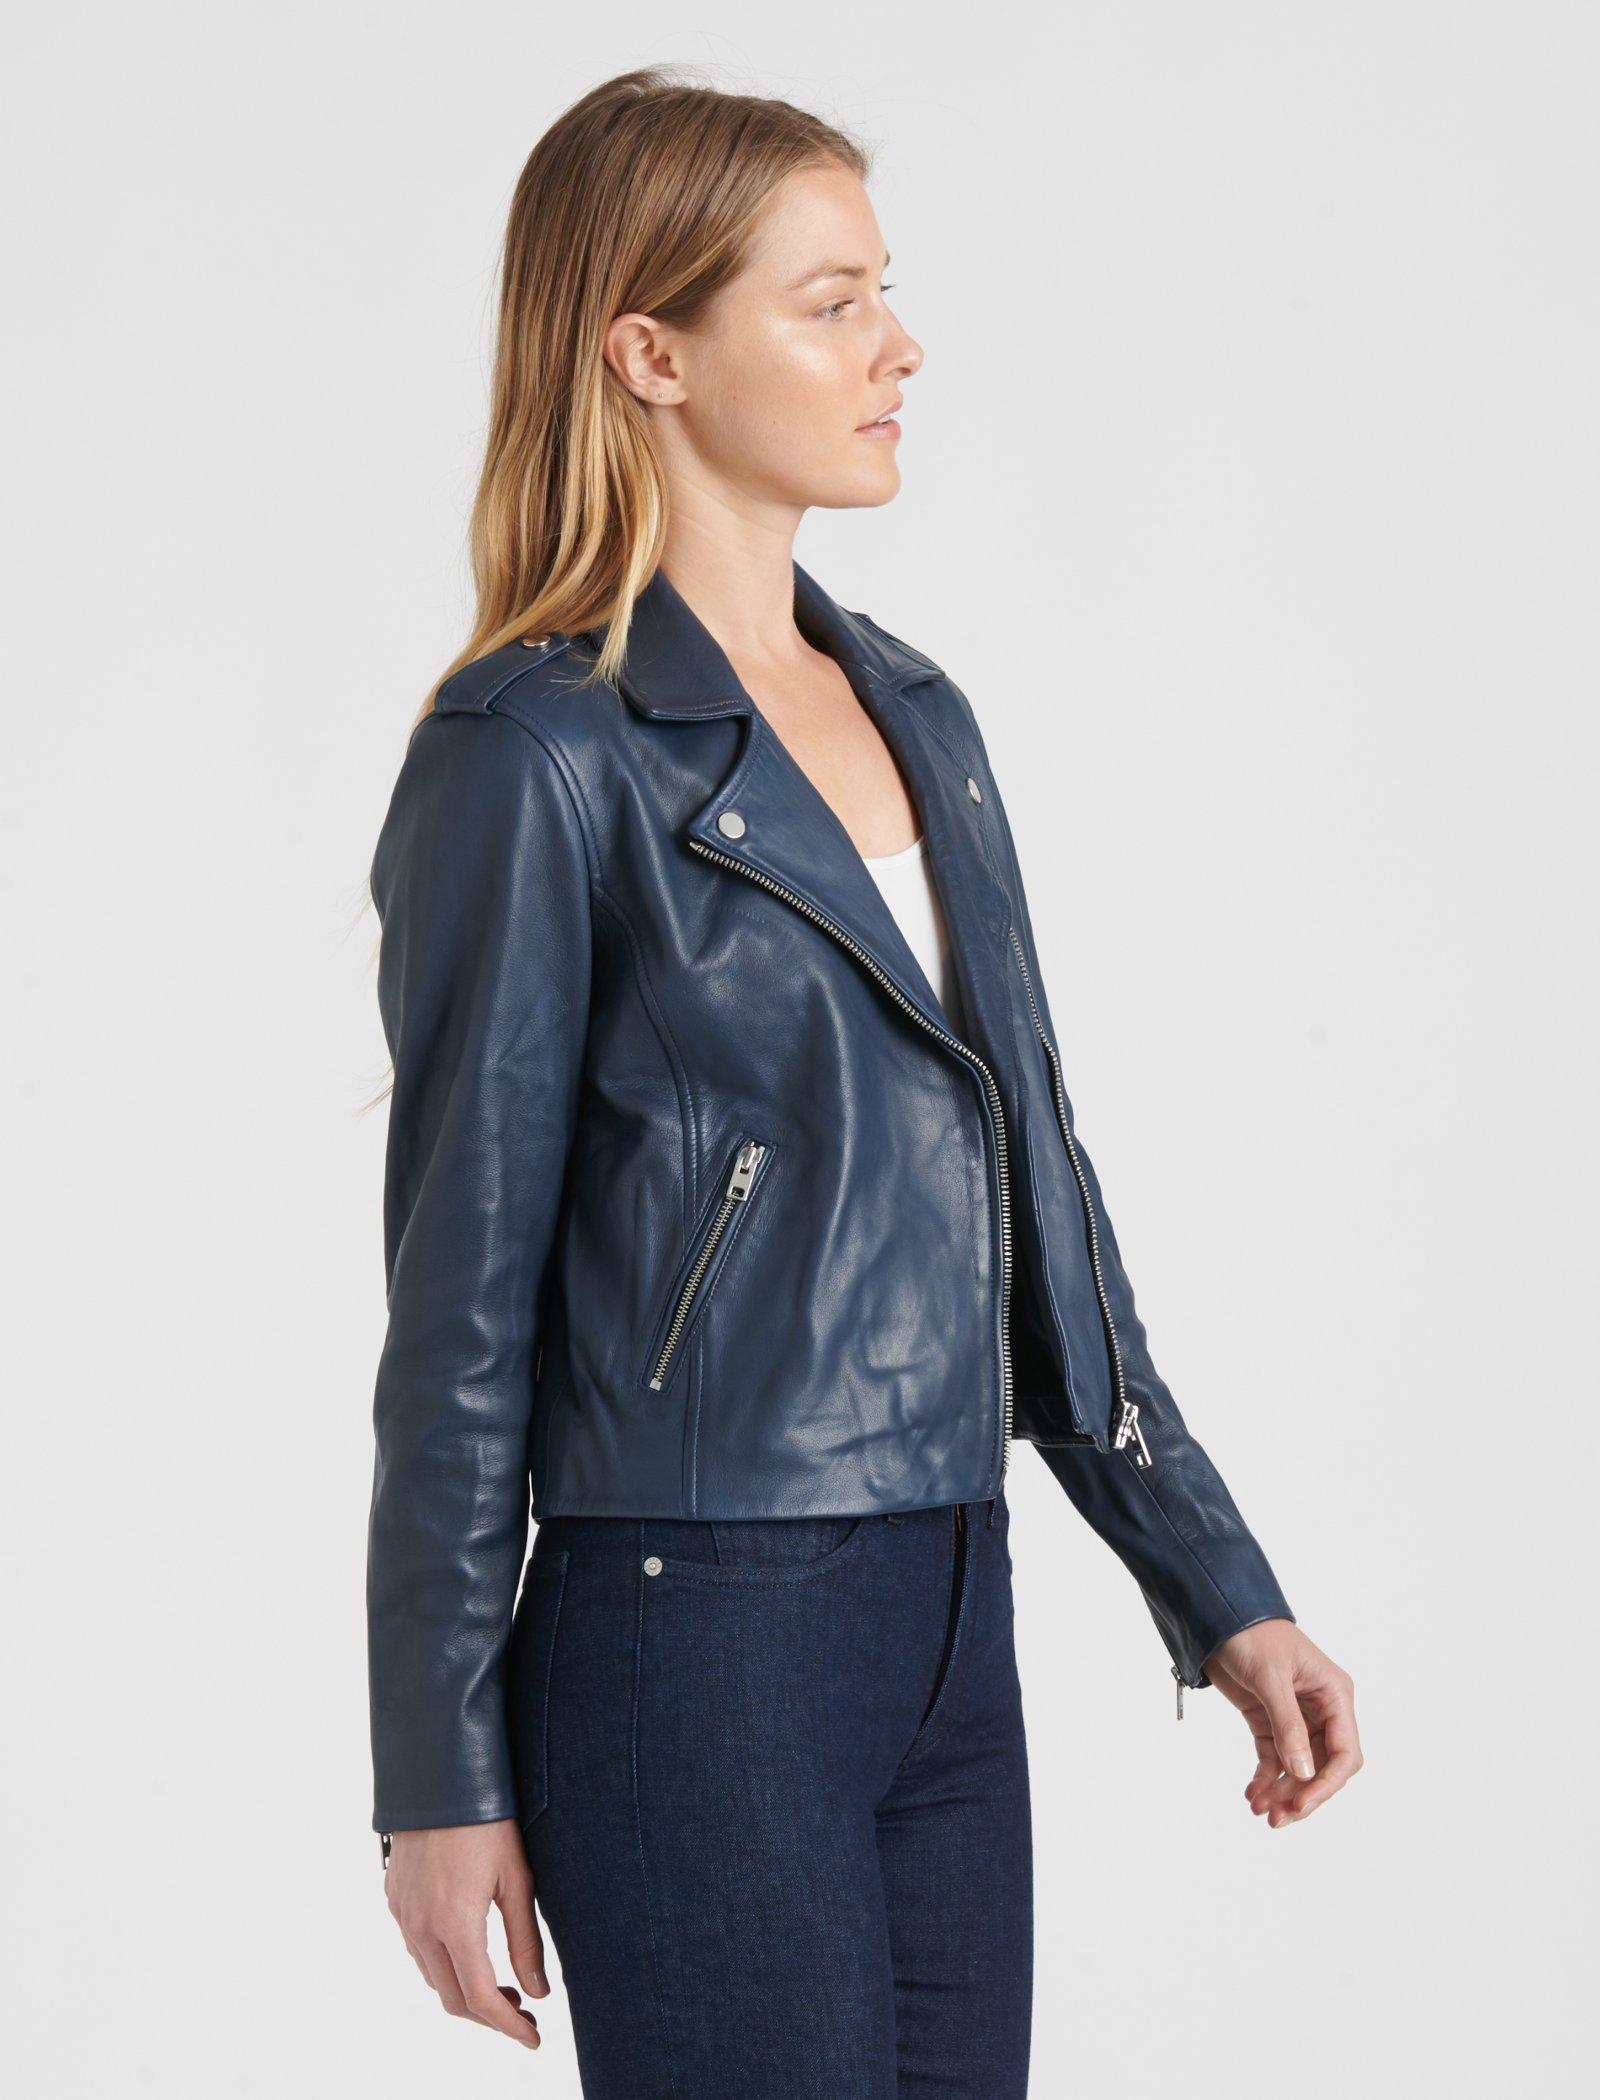 lucky brand motorcycle jackets